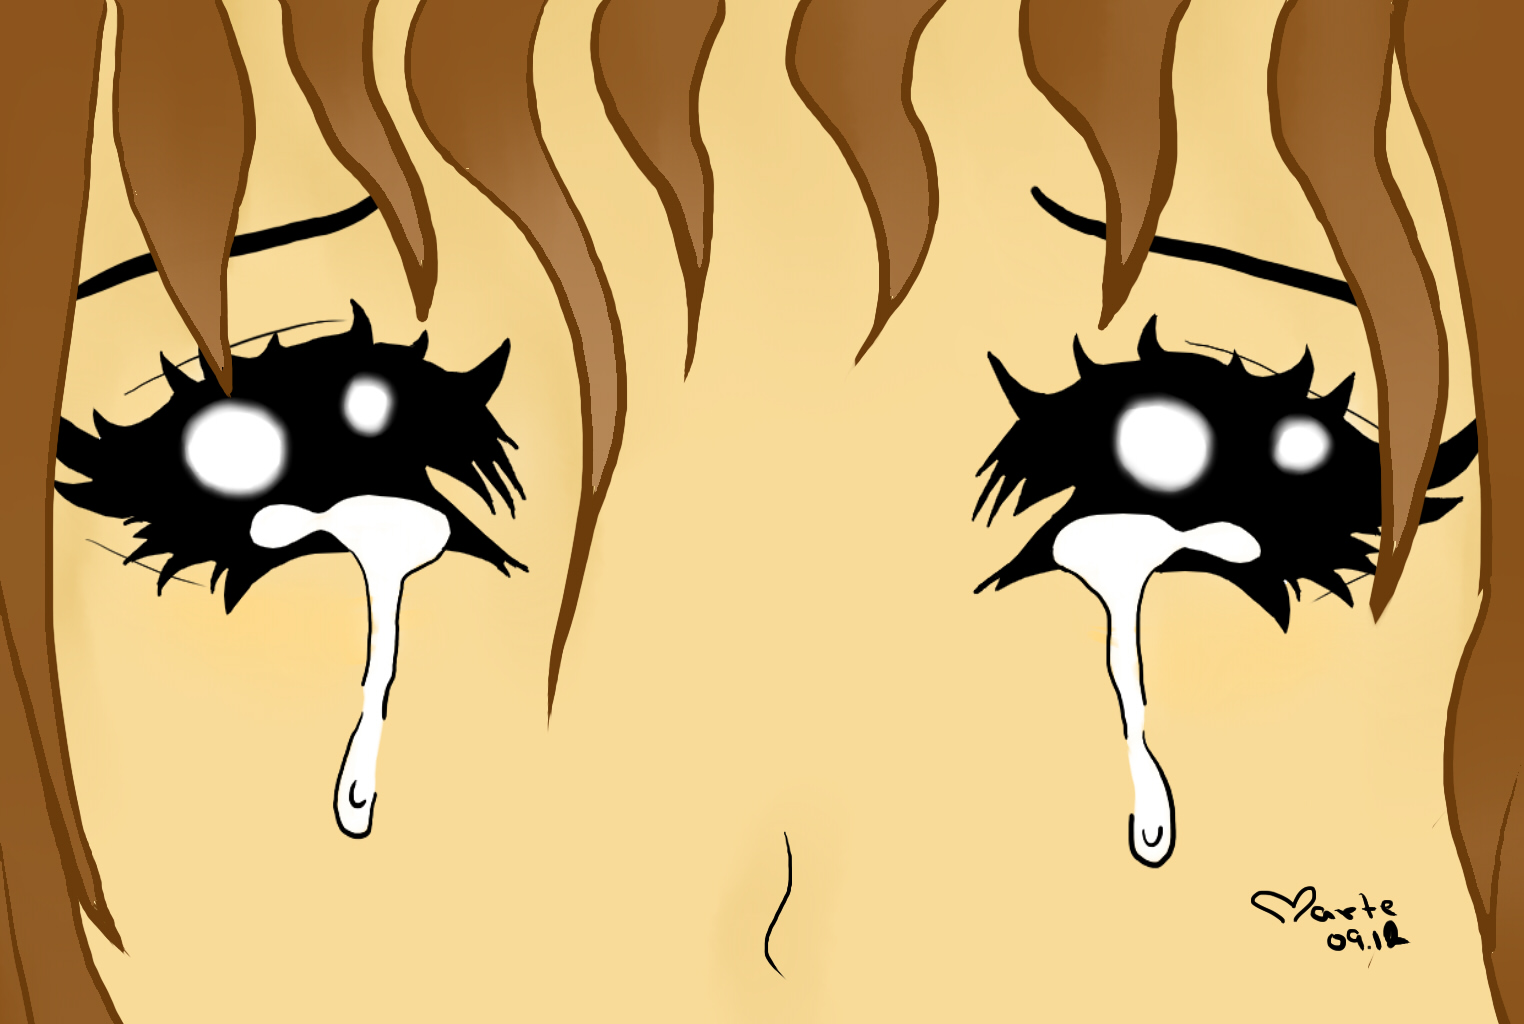 Crying Cartoon Girl | Free Download Clip Art | Free Clip Art | on ...